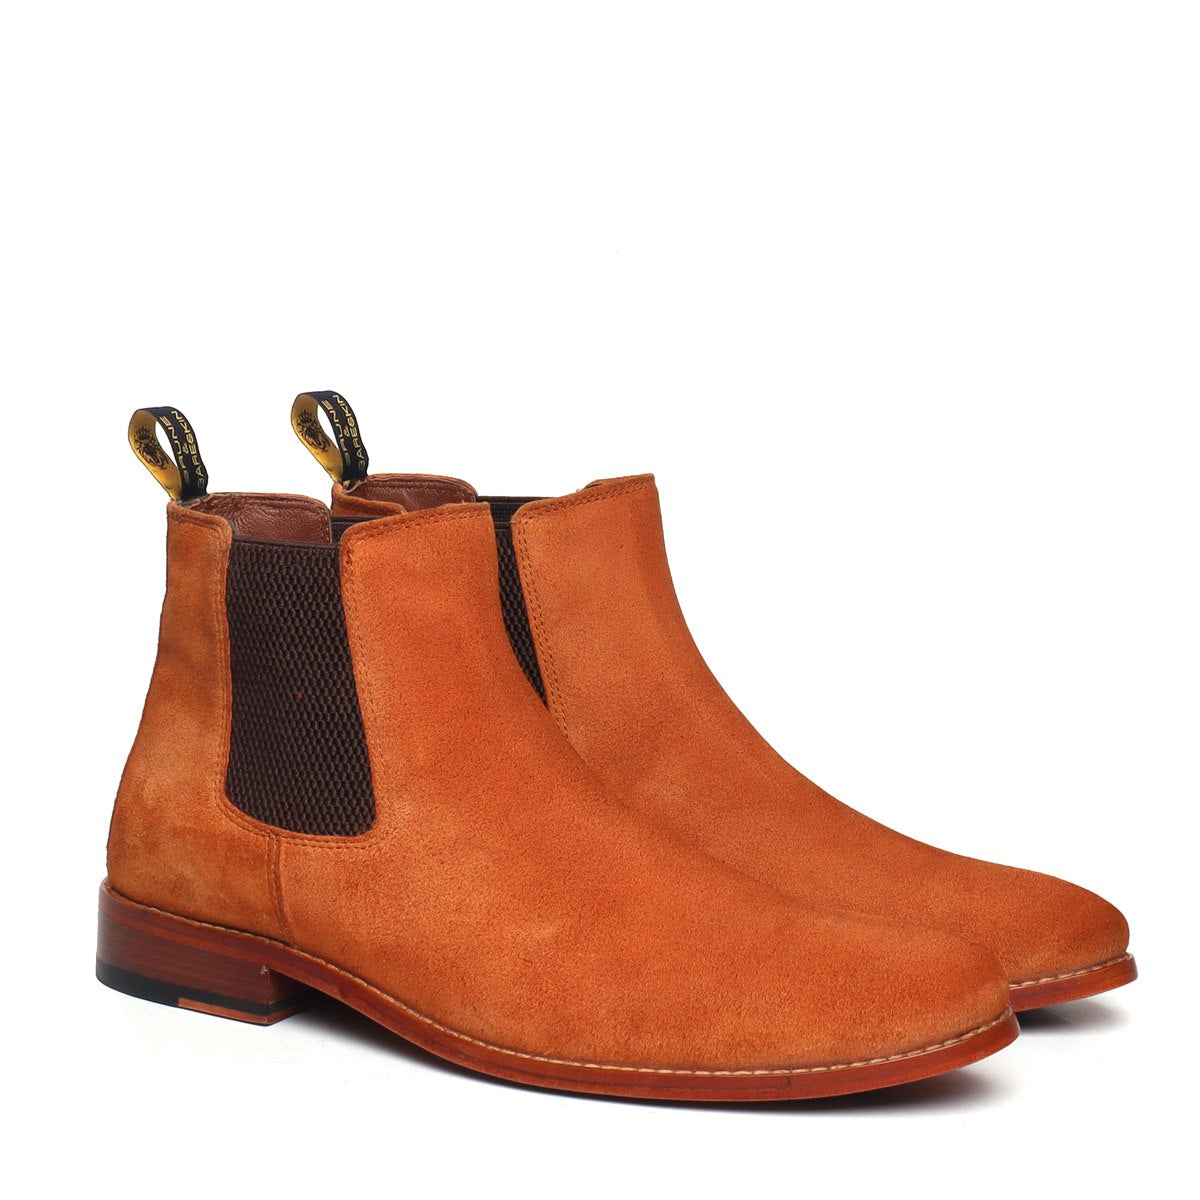 Orange Suede Leather Chelsea Boots with Leather Sole by Brune & Bareskin